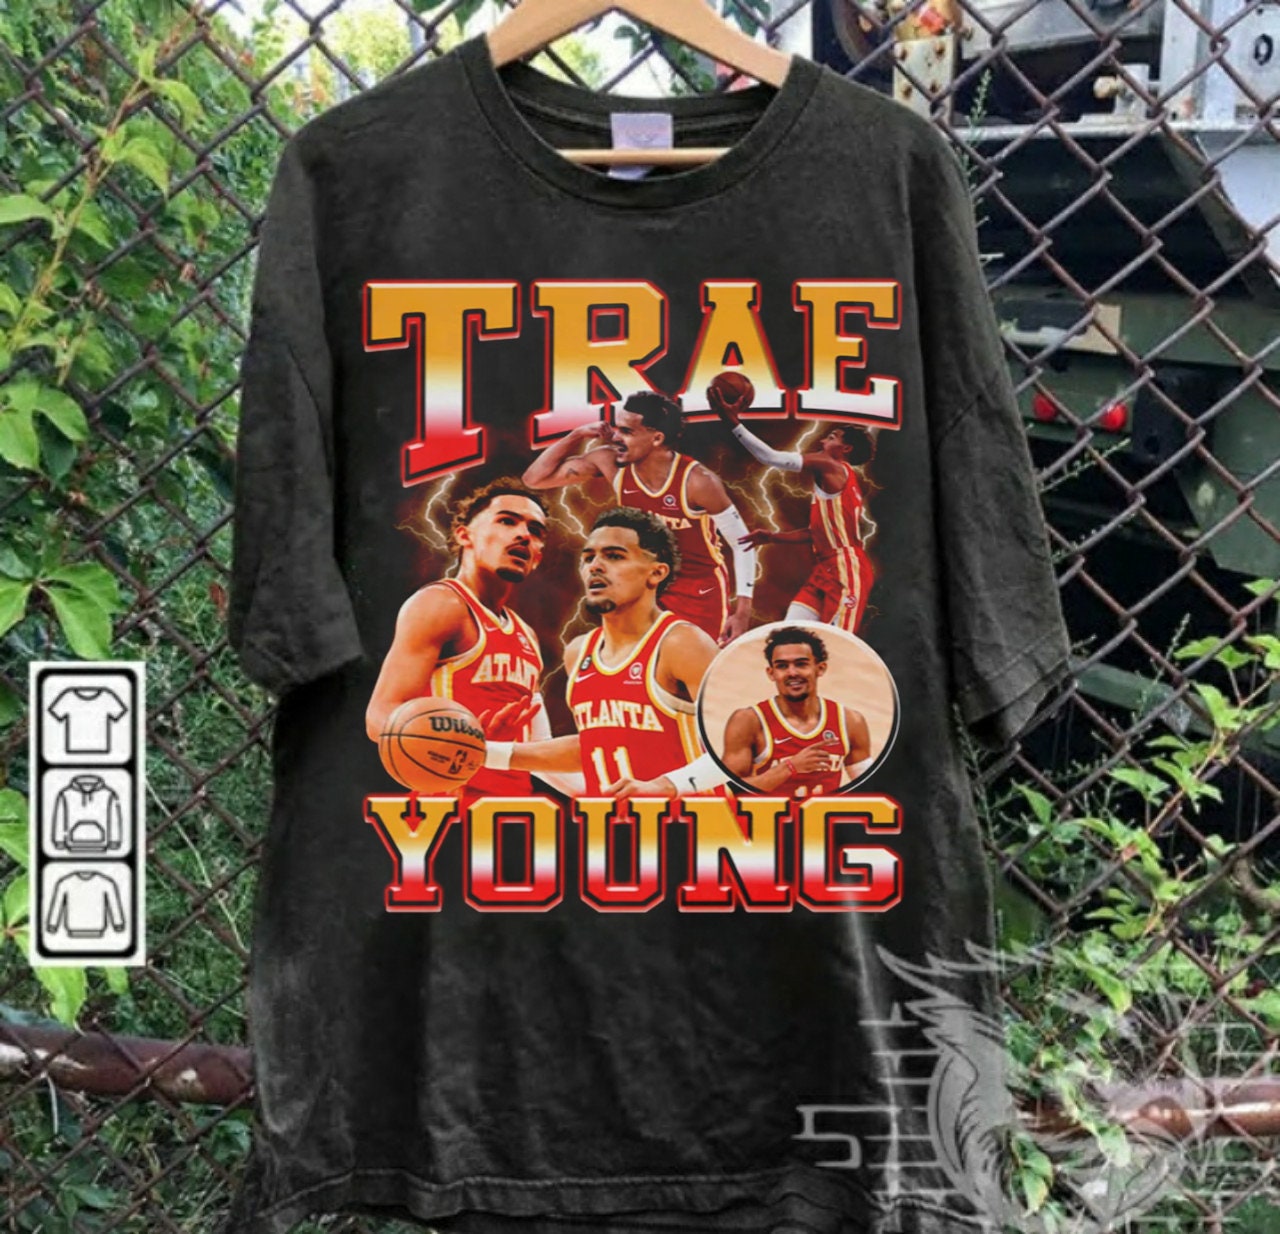 Trae Young Basketball shirt Classic 90s Graphic Tee Unisex Vintage Bootleg  Gift retro 100% cotton t shirt